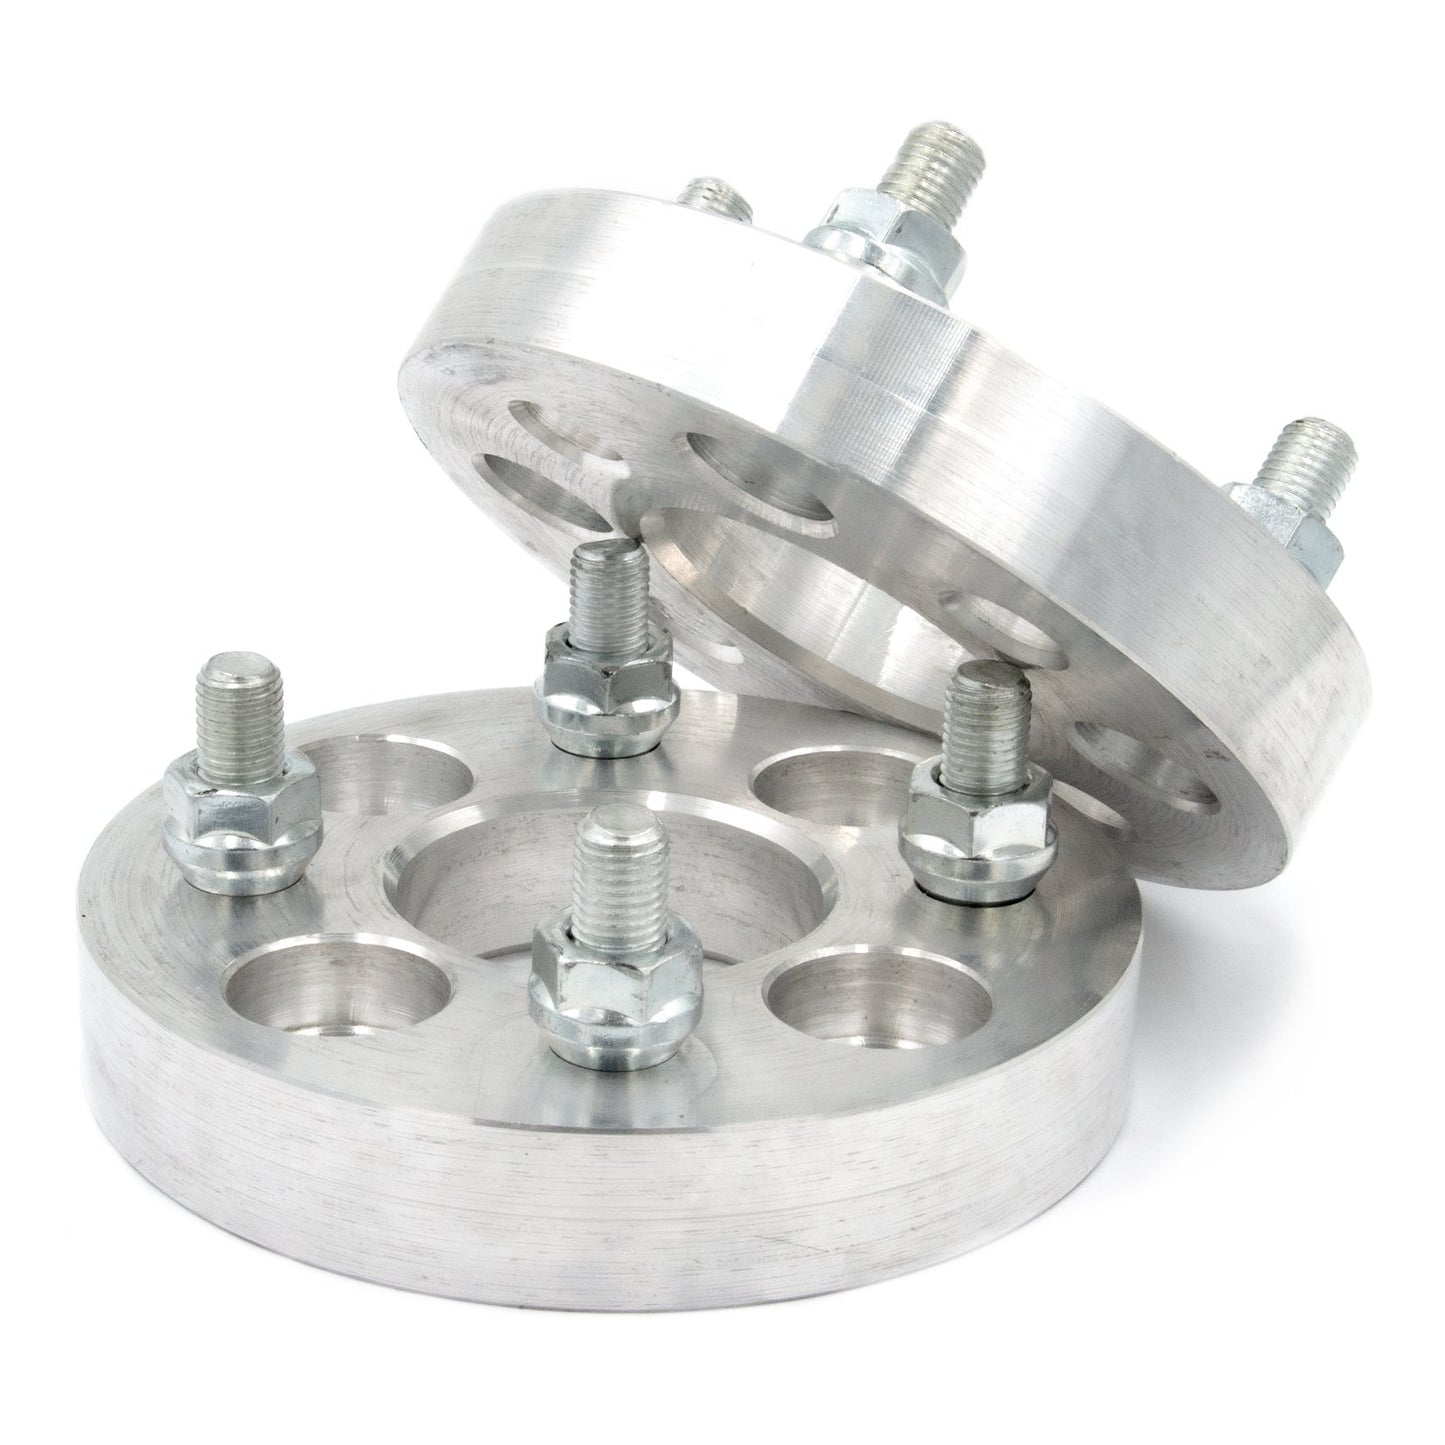 4x100 to 4x4.5" Wheel Spacer/Adapter - Thickness: 3/4"- 4"